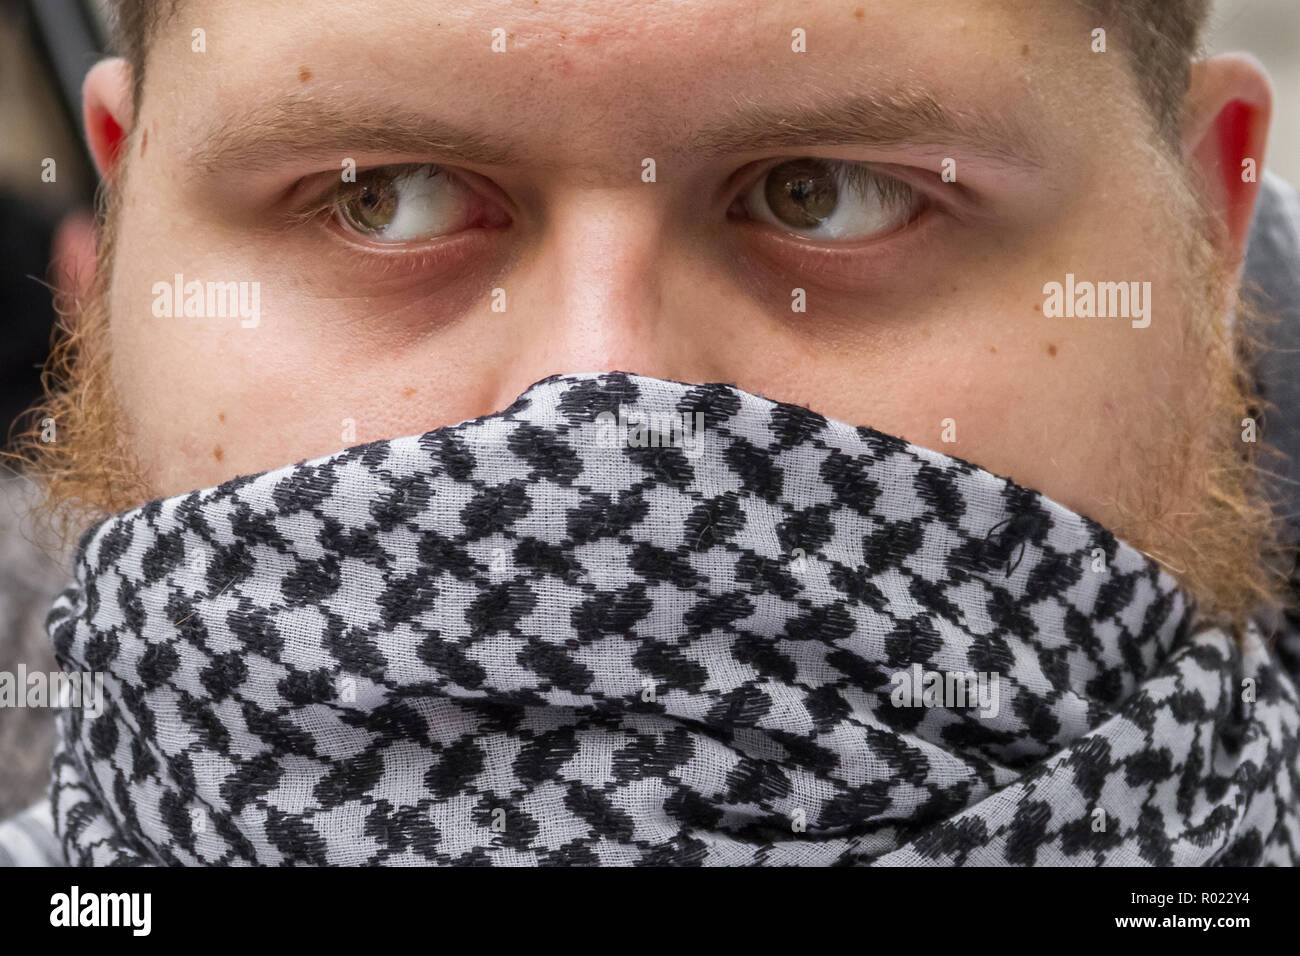 London, UK. 30th May, 2014. File Image from 30-05-2014: Lewis Ludlow, 26, from Rochester in Kent, a Muslim convert who also used the name Ali Hussain, is due to be sentenced for plotting an Islamic State-inspired attack on Oxford Street in which he hoped to kill 100 people. Ludlow is seen here in 2014 outside the London Central Mosque during a protest organised by radical cleric Anjem Choudary and his banned Al-Muhajiroun (ALM) group. Credit: Guy Corbishley/Alamy Live News Stock Photo